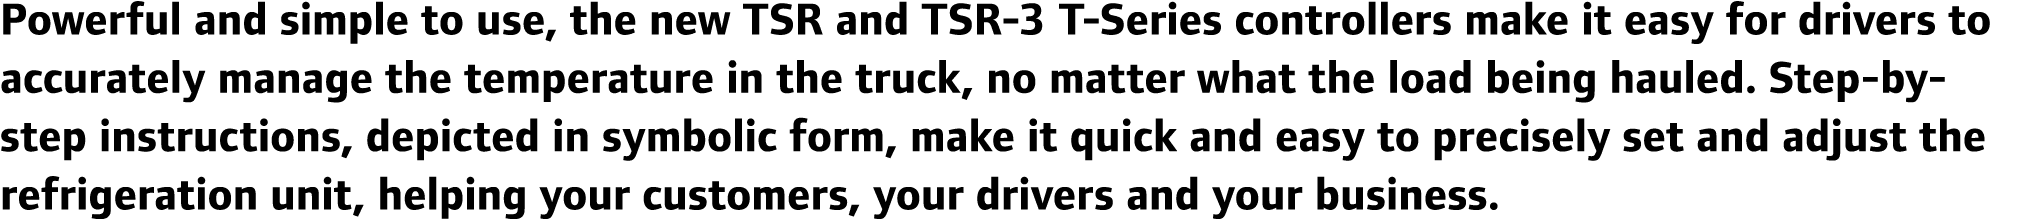 Powerful and simple to use, the new TSR and TSR-3 T-Series controllers make it easy for drivers to accurately manage ...